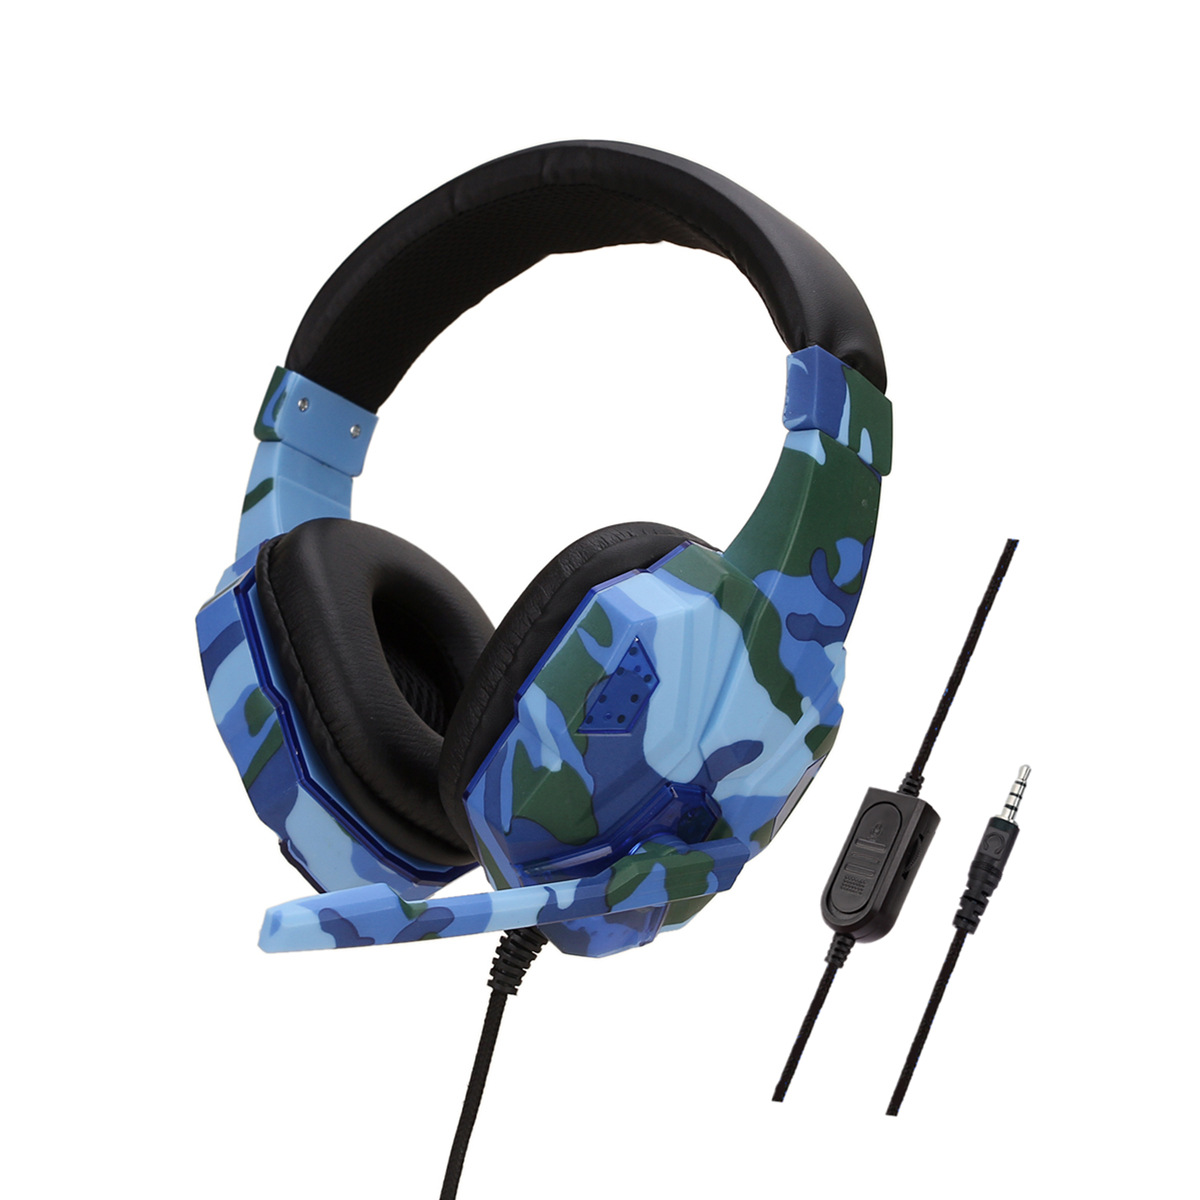 Earphone Gaming Headset Camouflage Headphones with Microphone for PC Laptop